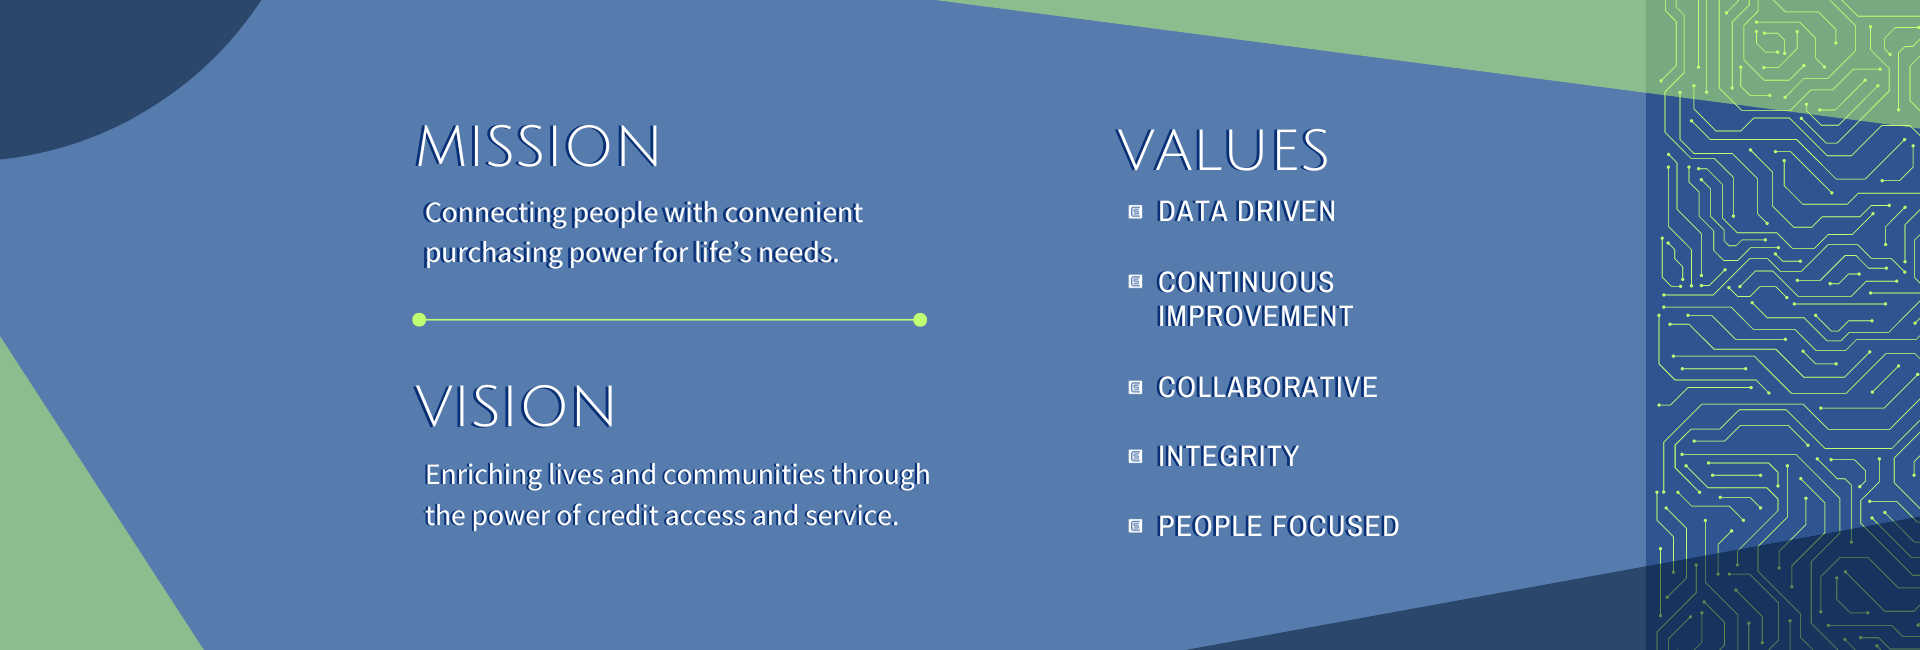 Mission is connecting people with convenient purchasing power for life's needs. Vision is enriching lives and communities through the power of credit access and services. Values are data driven, continuous improvement, collaboration, integrity, and people focused.